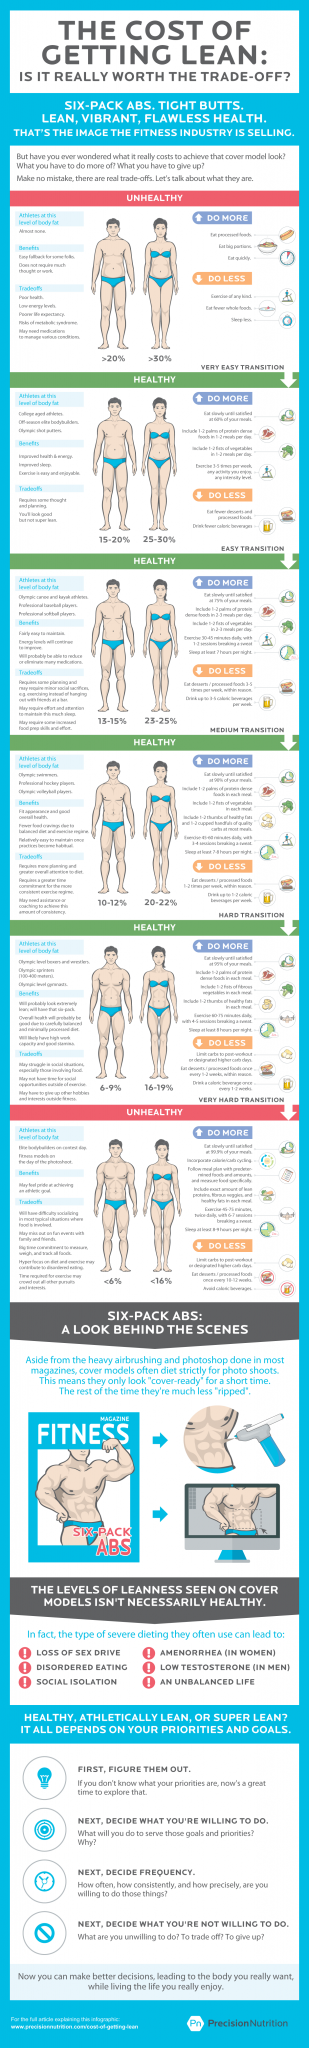 precision-nutrition-cost-of-getting-lean-infographic - Adrenaline ...